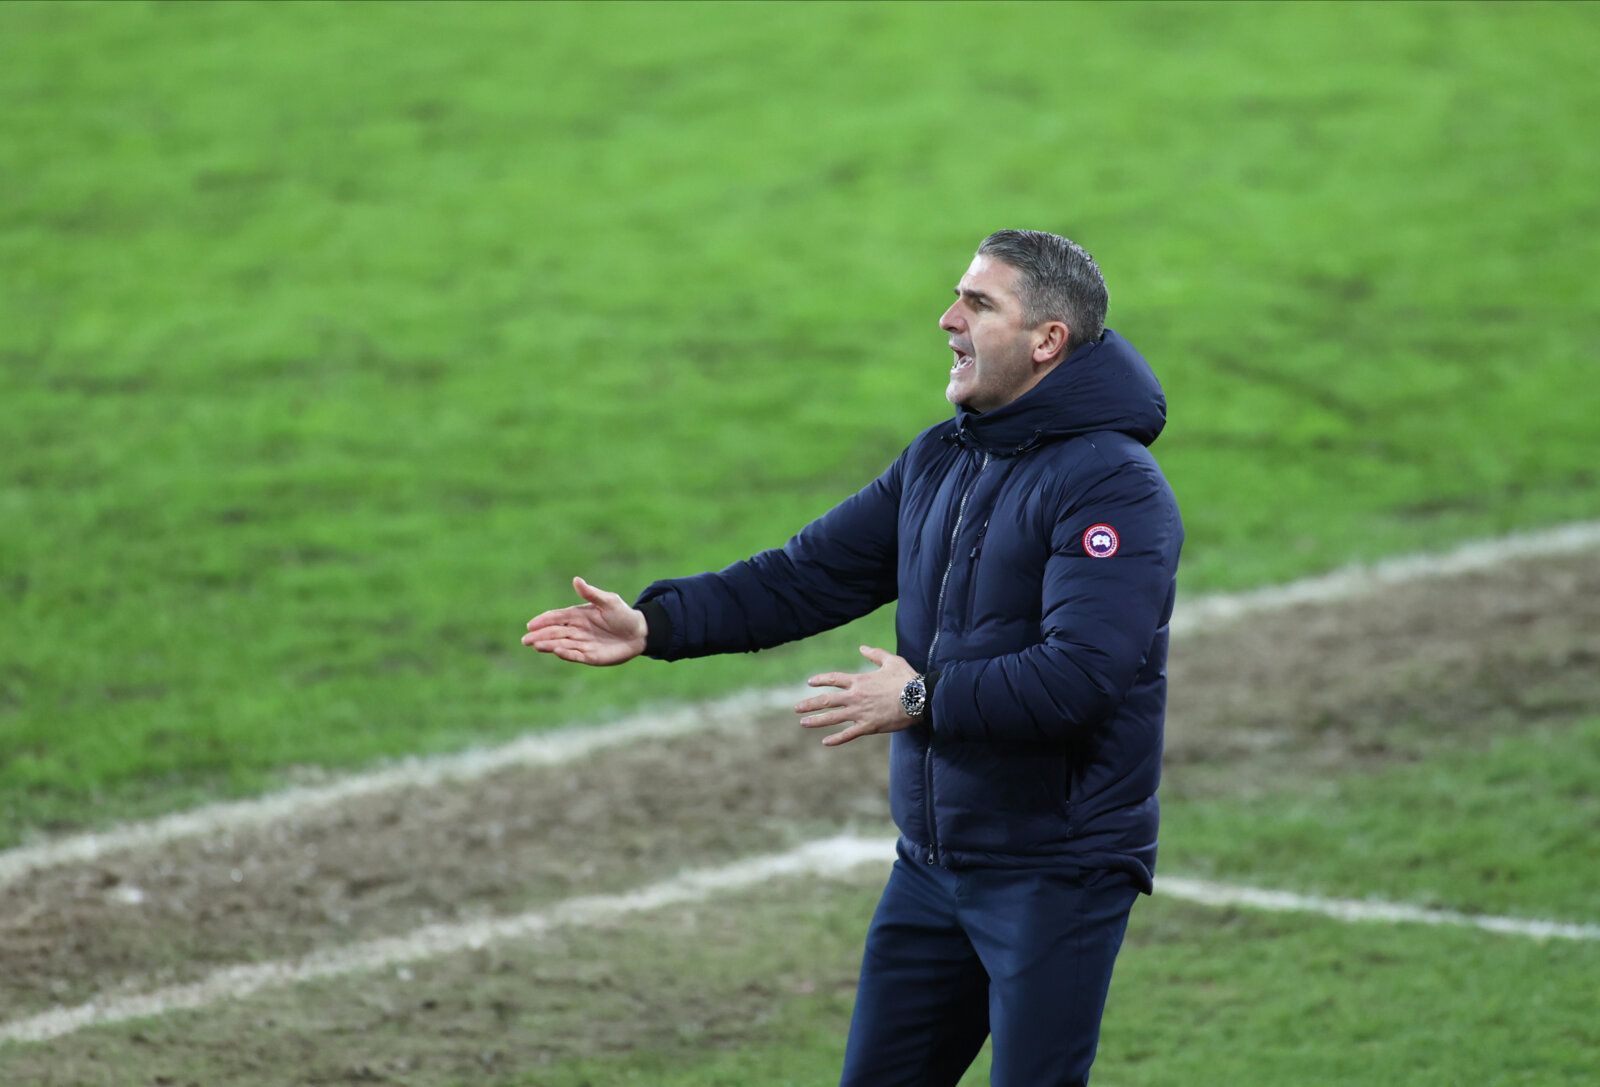 Soccer Football - League One - Sunderland v Plymouth Argyle - Stadium of Light, Sunderland, Britain - January 19, 2021 Plymouth's manager Ryan Lowe during the match Action Images/Lee Smith EDITORIAL USE ONLY. No use with unauthorized audio, video, data, fixture lists, club/league logos or 'live' services. Online in-match use limited to 75 images, no video emulation. No use in betting, games or single club /league/player publications.  Please contact your account representative for further detail